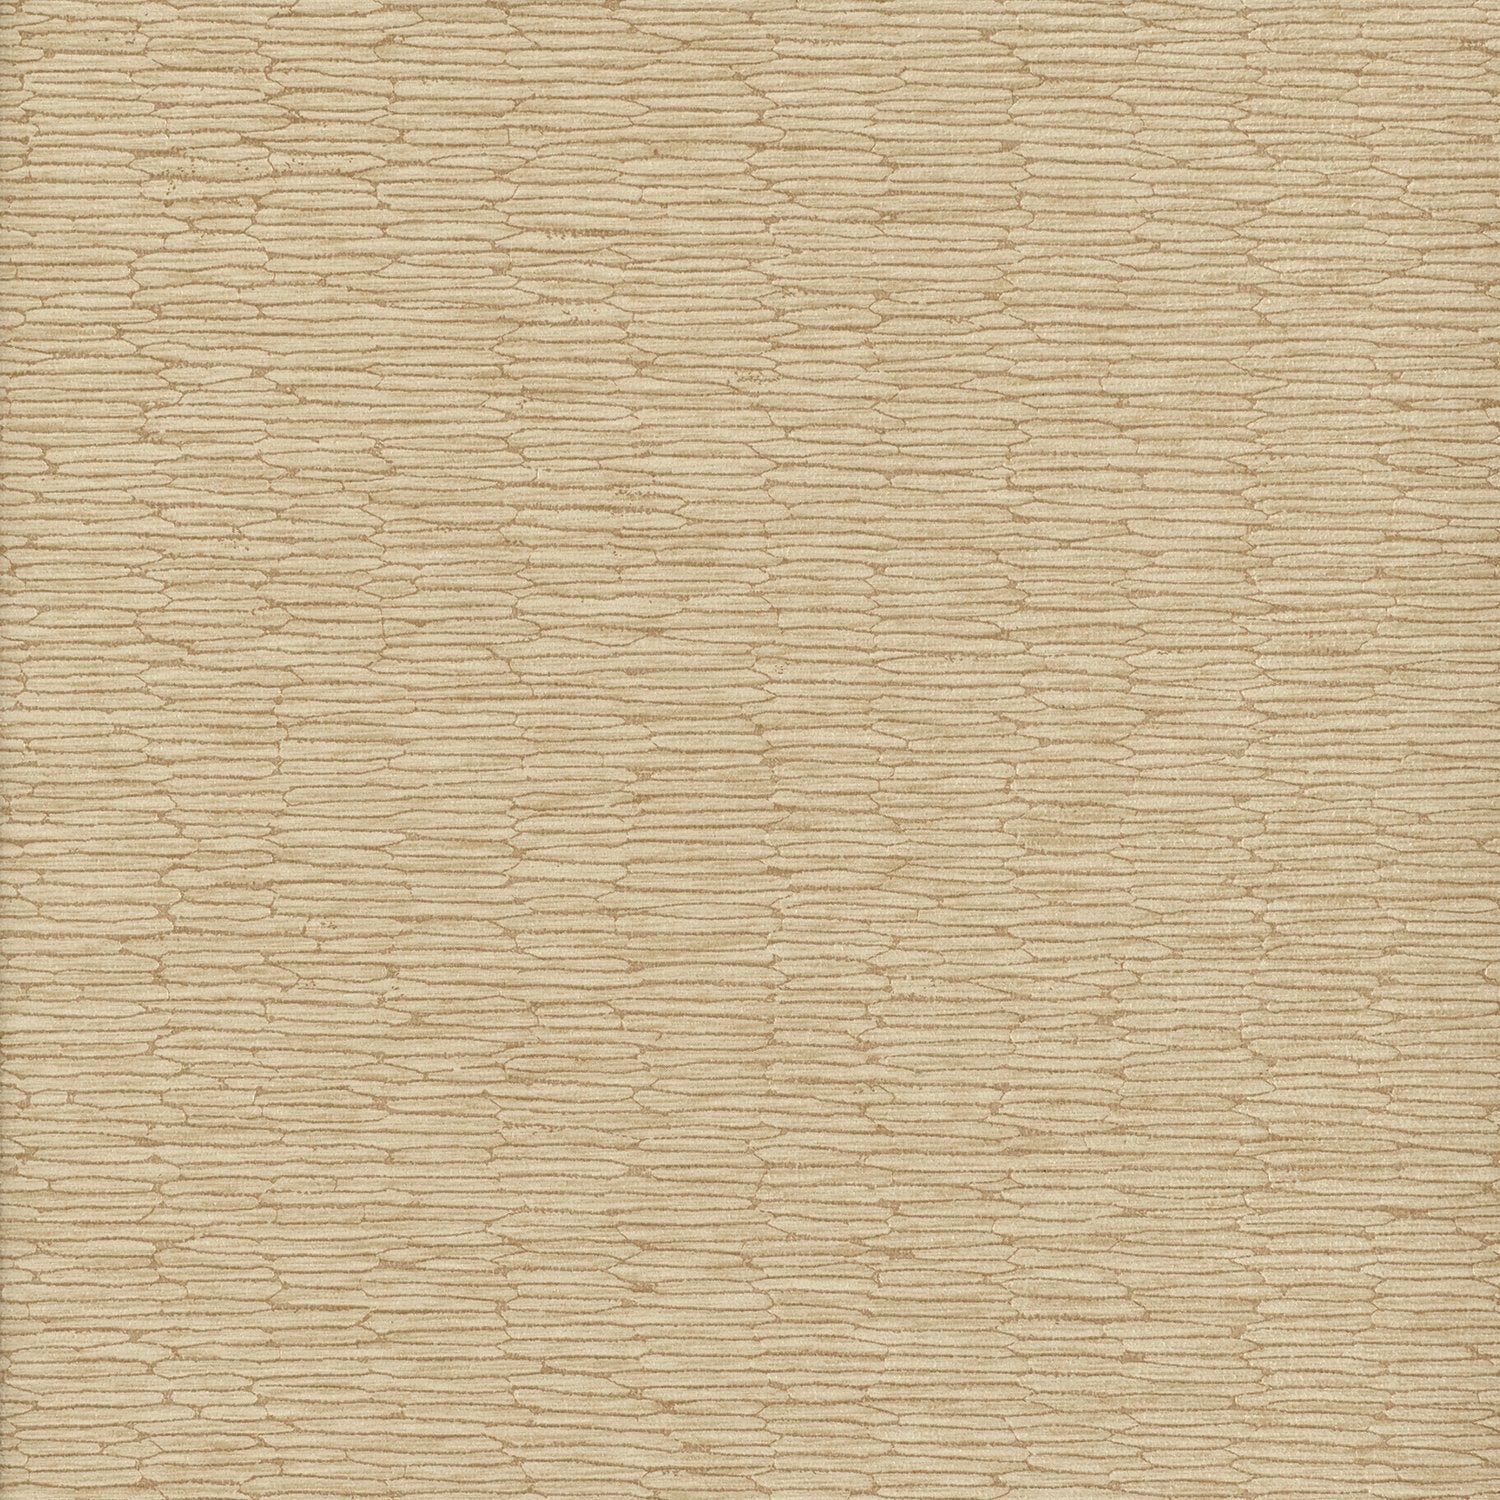 Chipper - Y46859 - Wallcovering - Vycon - Kube Contract